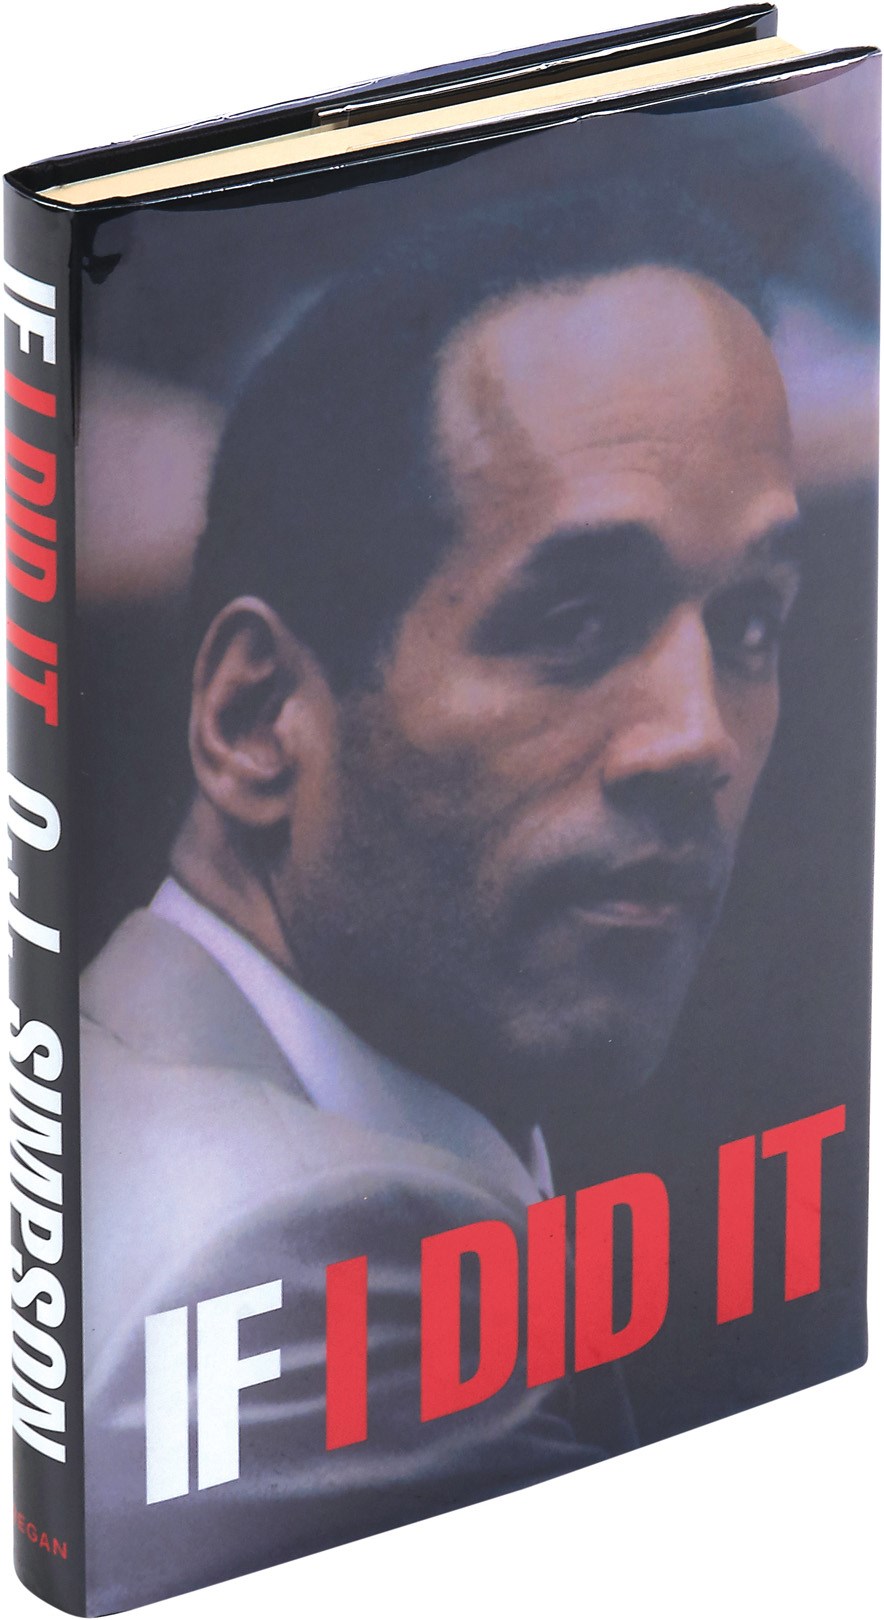 Football - 2006 "If I Did It" First Edition by OJ Simpson